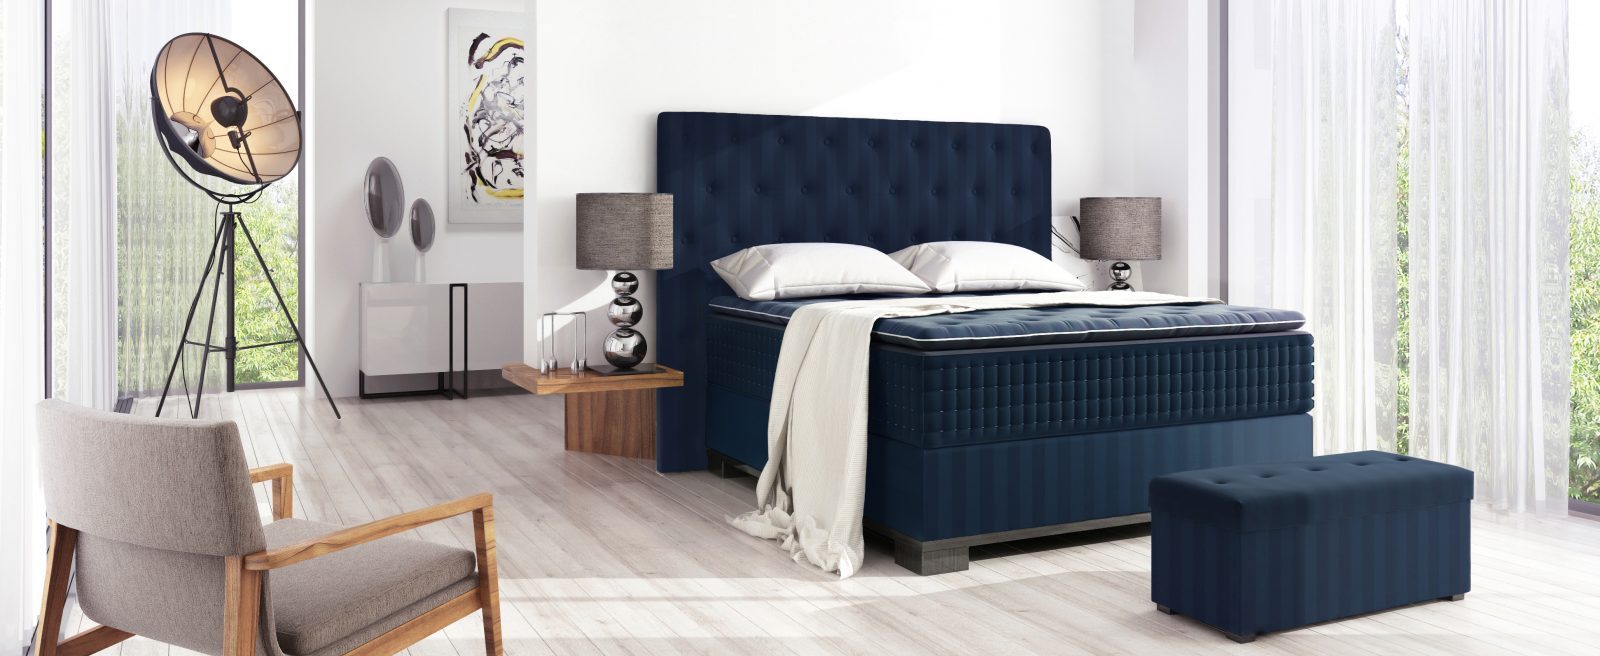 pauly-beds-continental-luxury-mattress-sissi